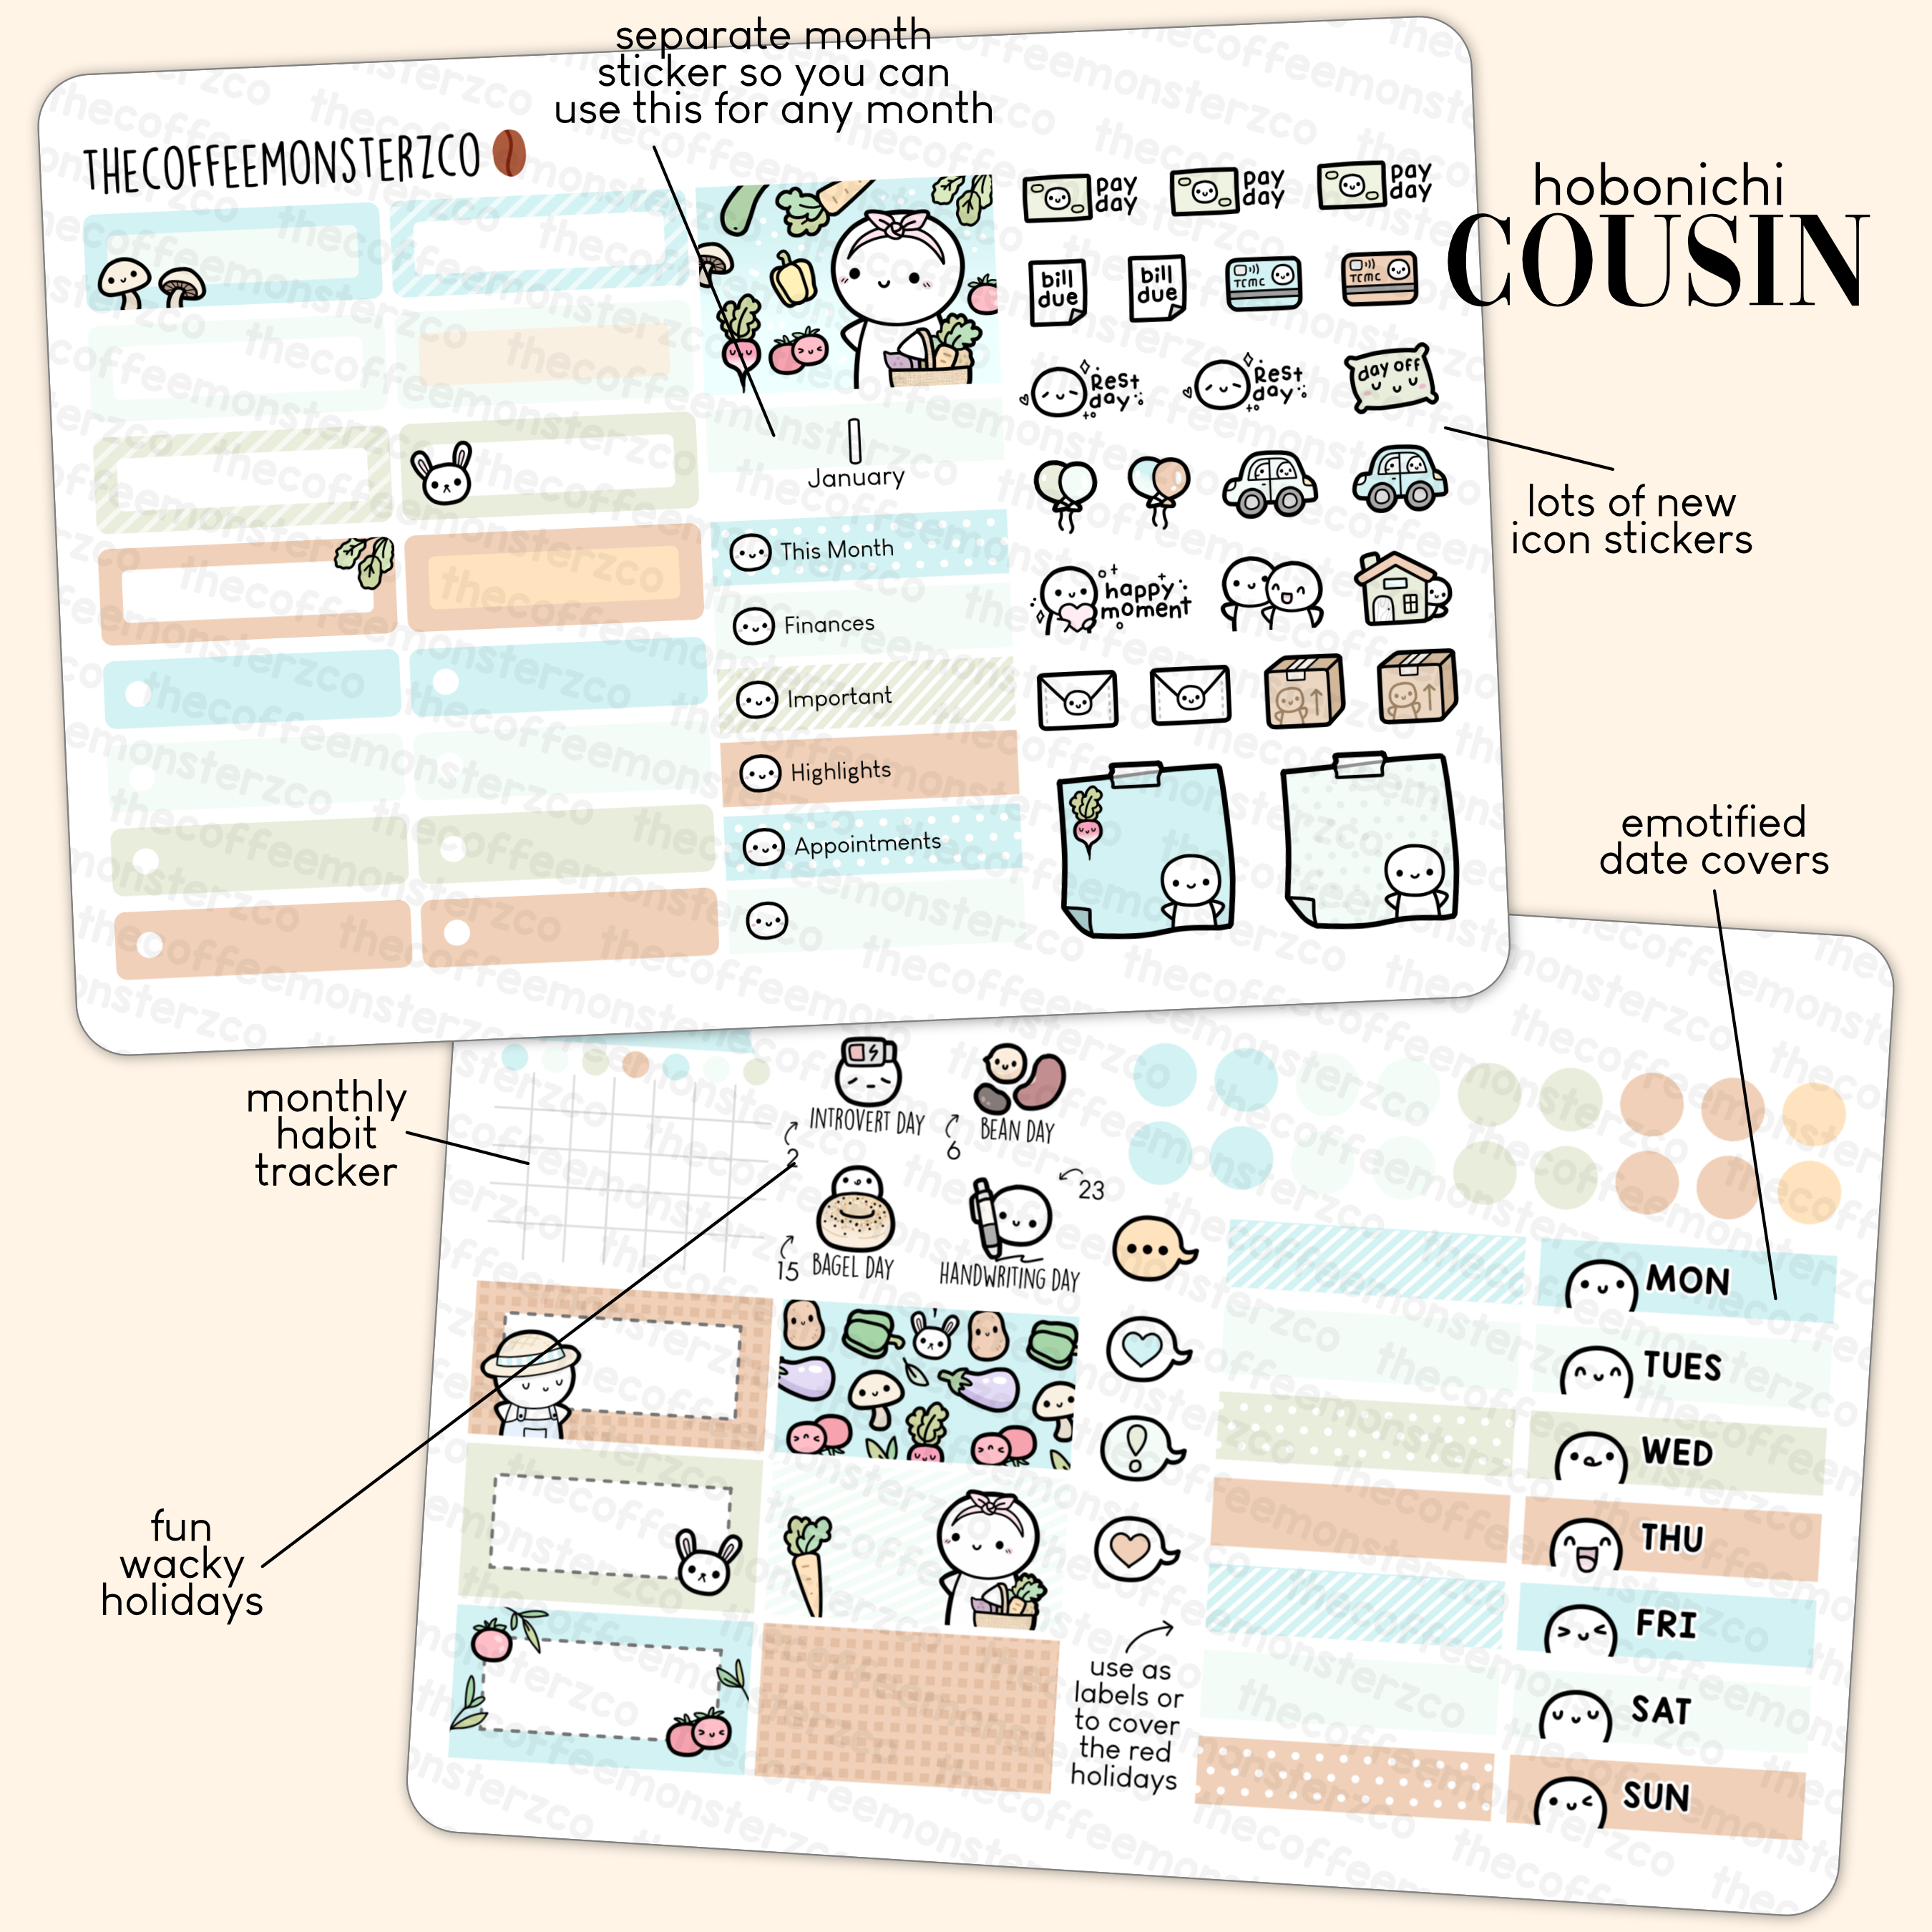 2024 Hobonichi Cousin Monthly Kits - Part 1